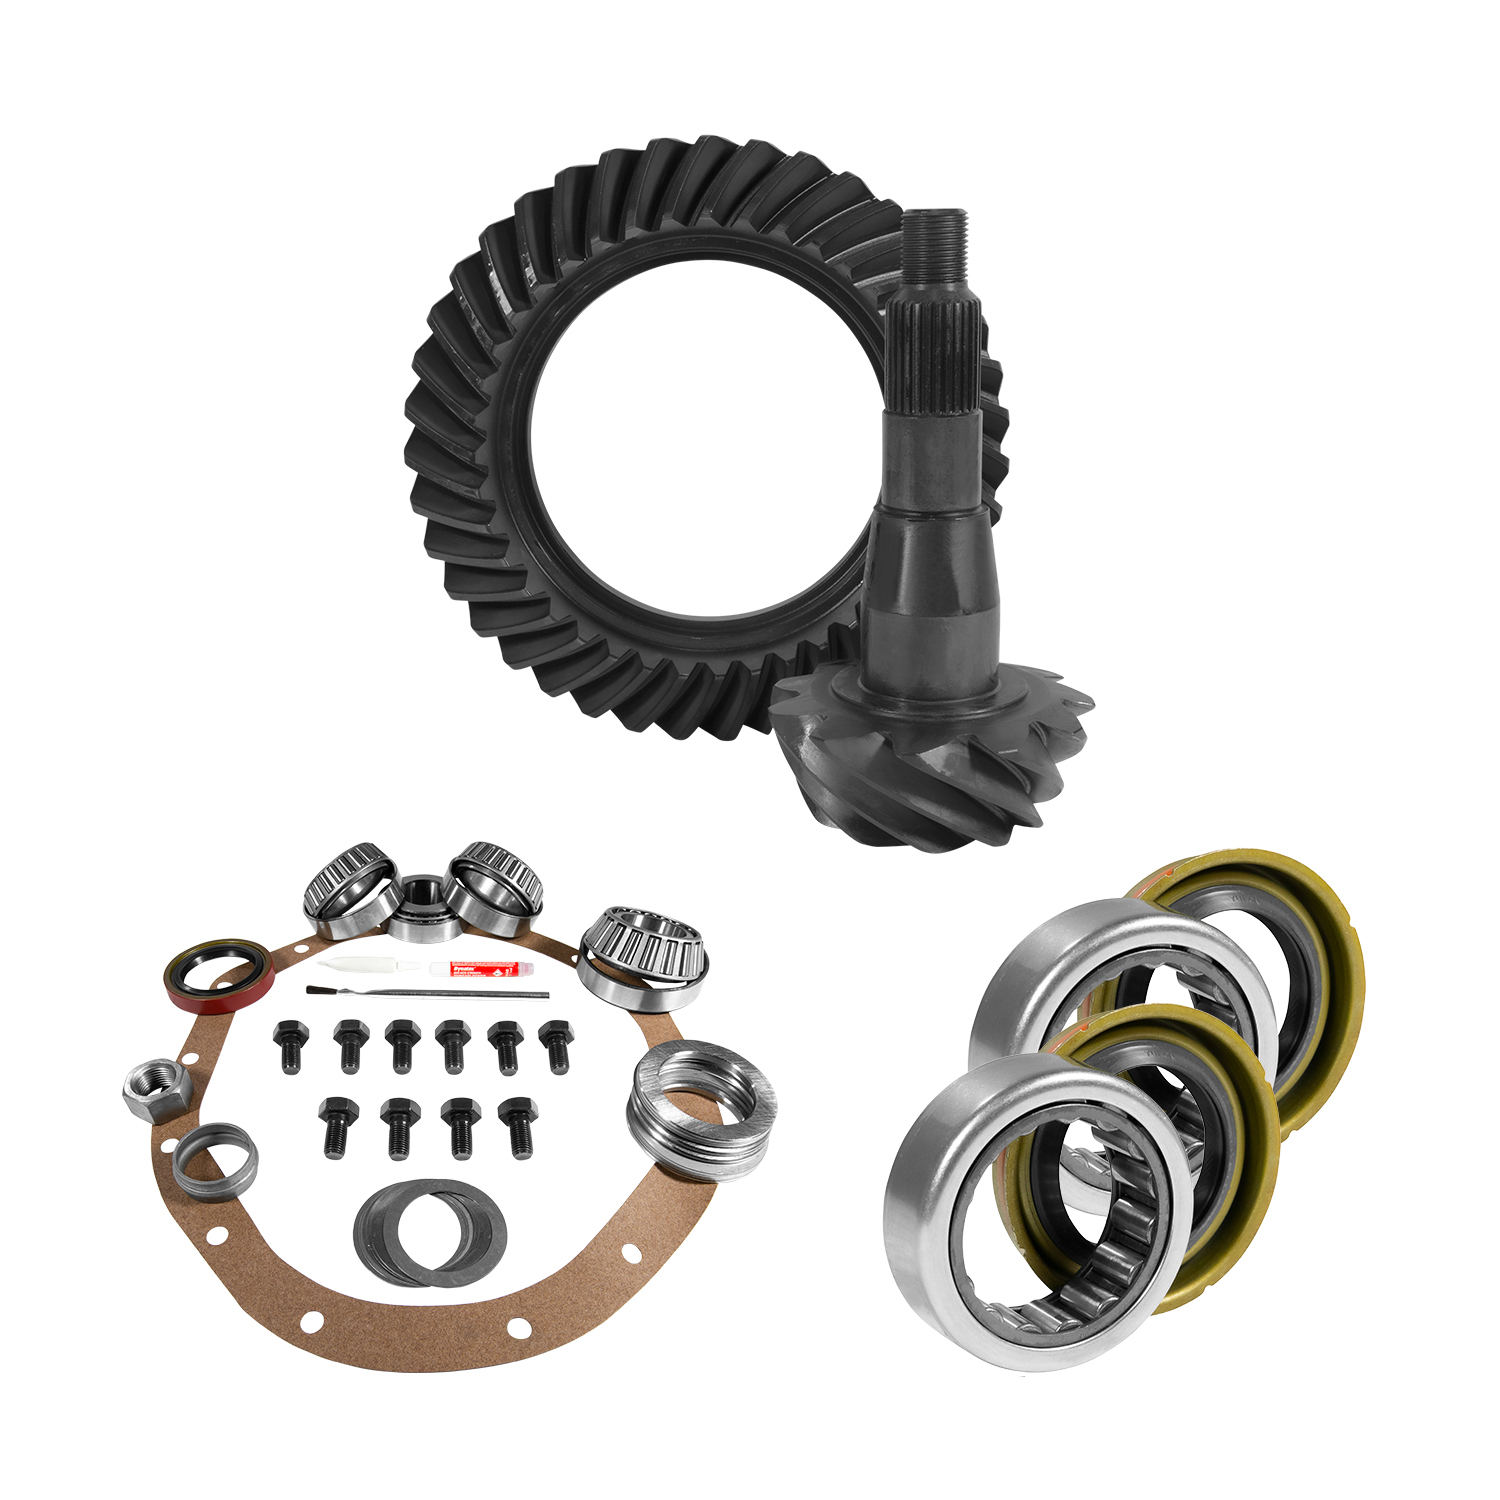 USA Standard 10787 9.25 in. Chy 3.21 Rear Ring & Pinion Install Kit, 1.705 in. Axle Bearings & Seal